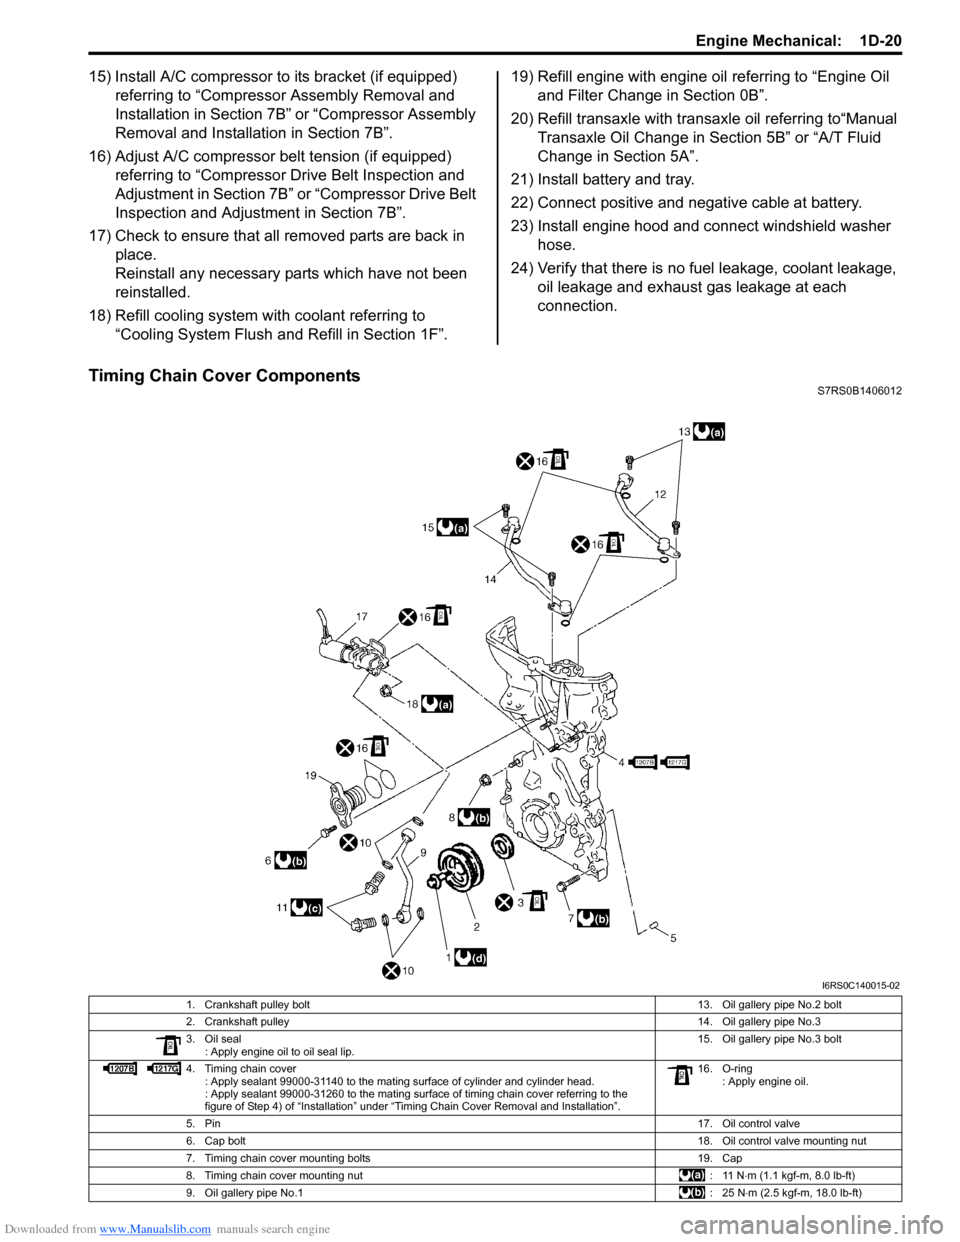 SUZUKI SWIFT 2008 2.G Service Owners Manual Downloaded from www.Manualslib.com manuals search engine Engine Mechanical:  1D-20
15) Install A/C compressor to its bracket (if equipped) referring to “Compressor Assembly Removal and 
Installation